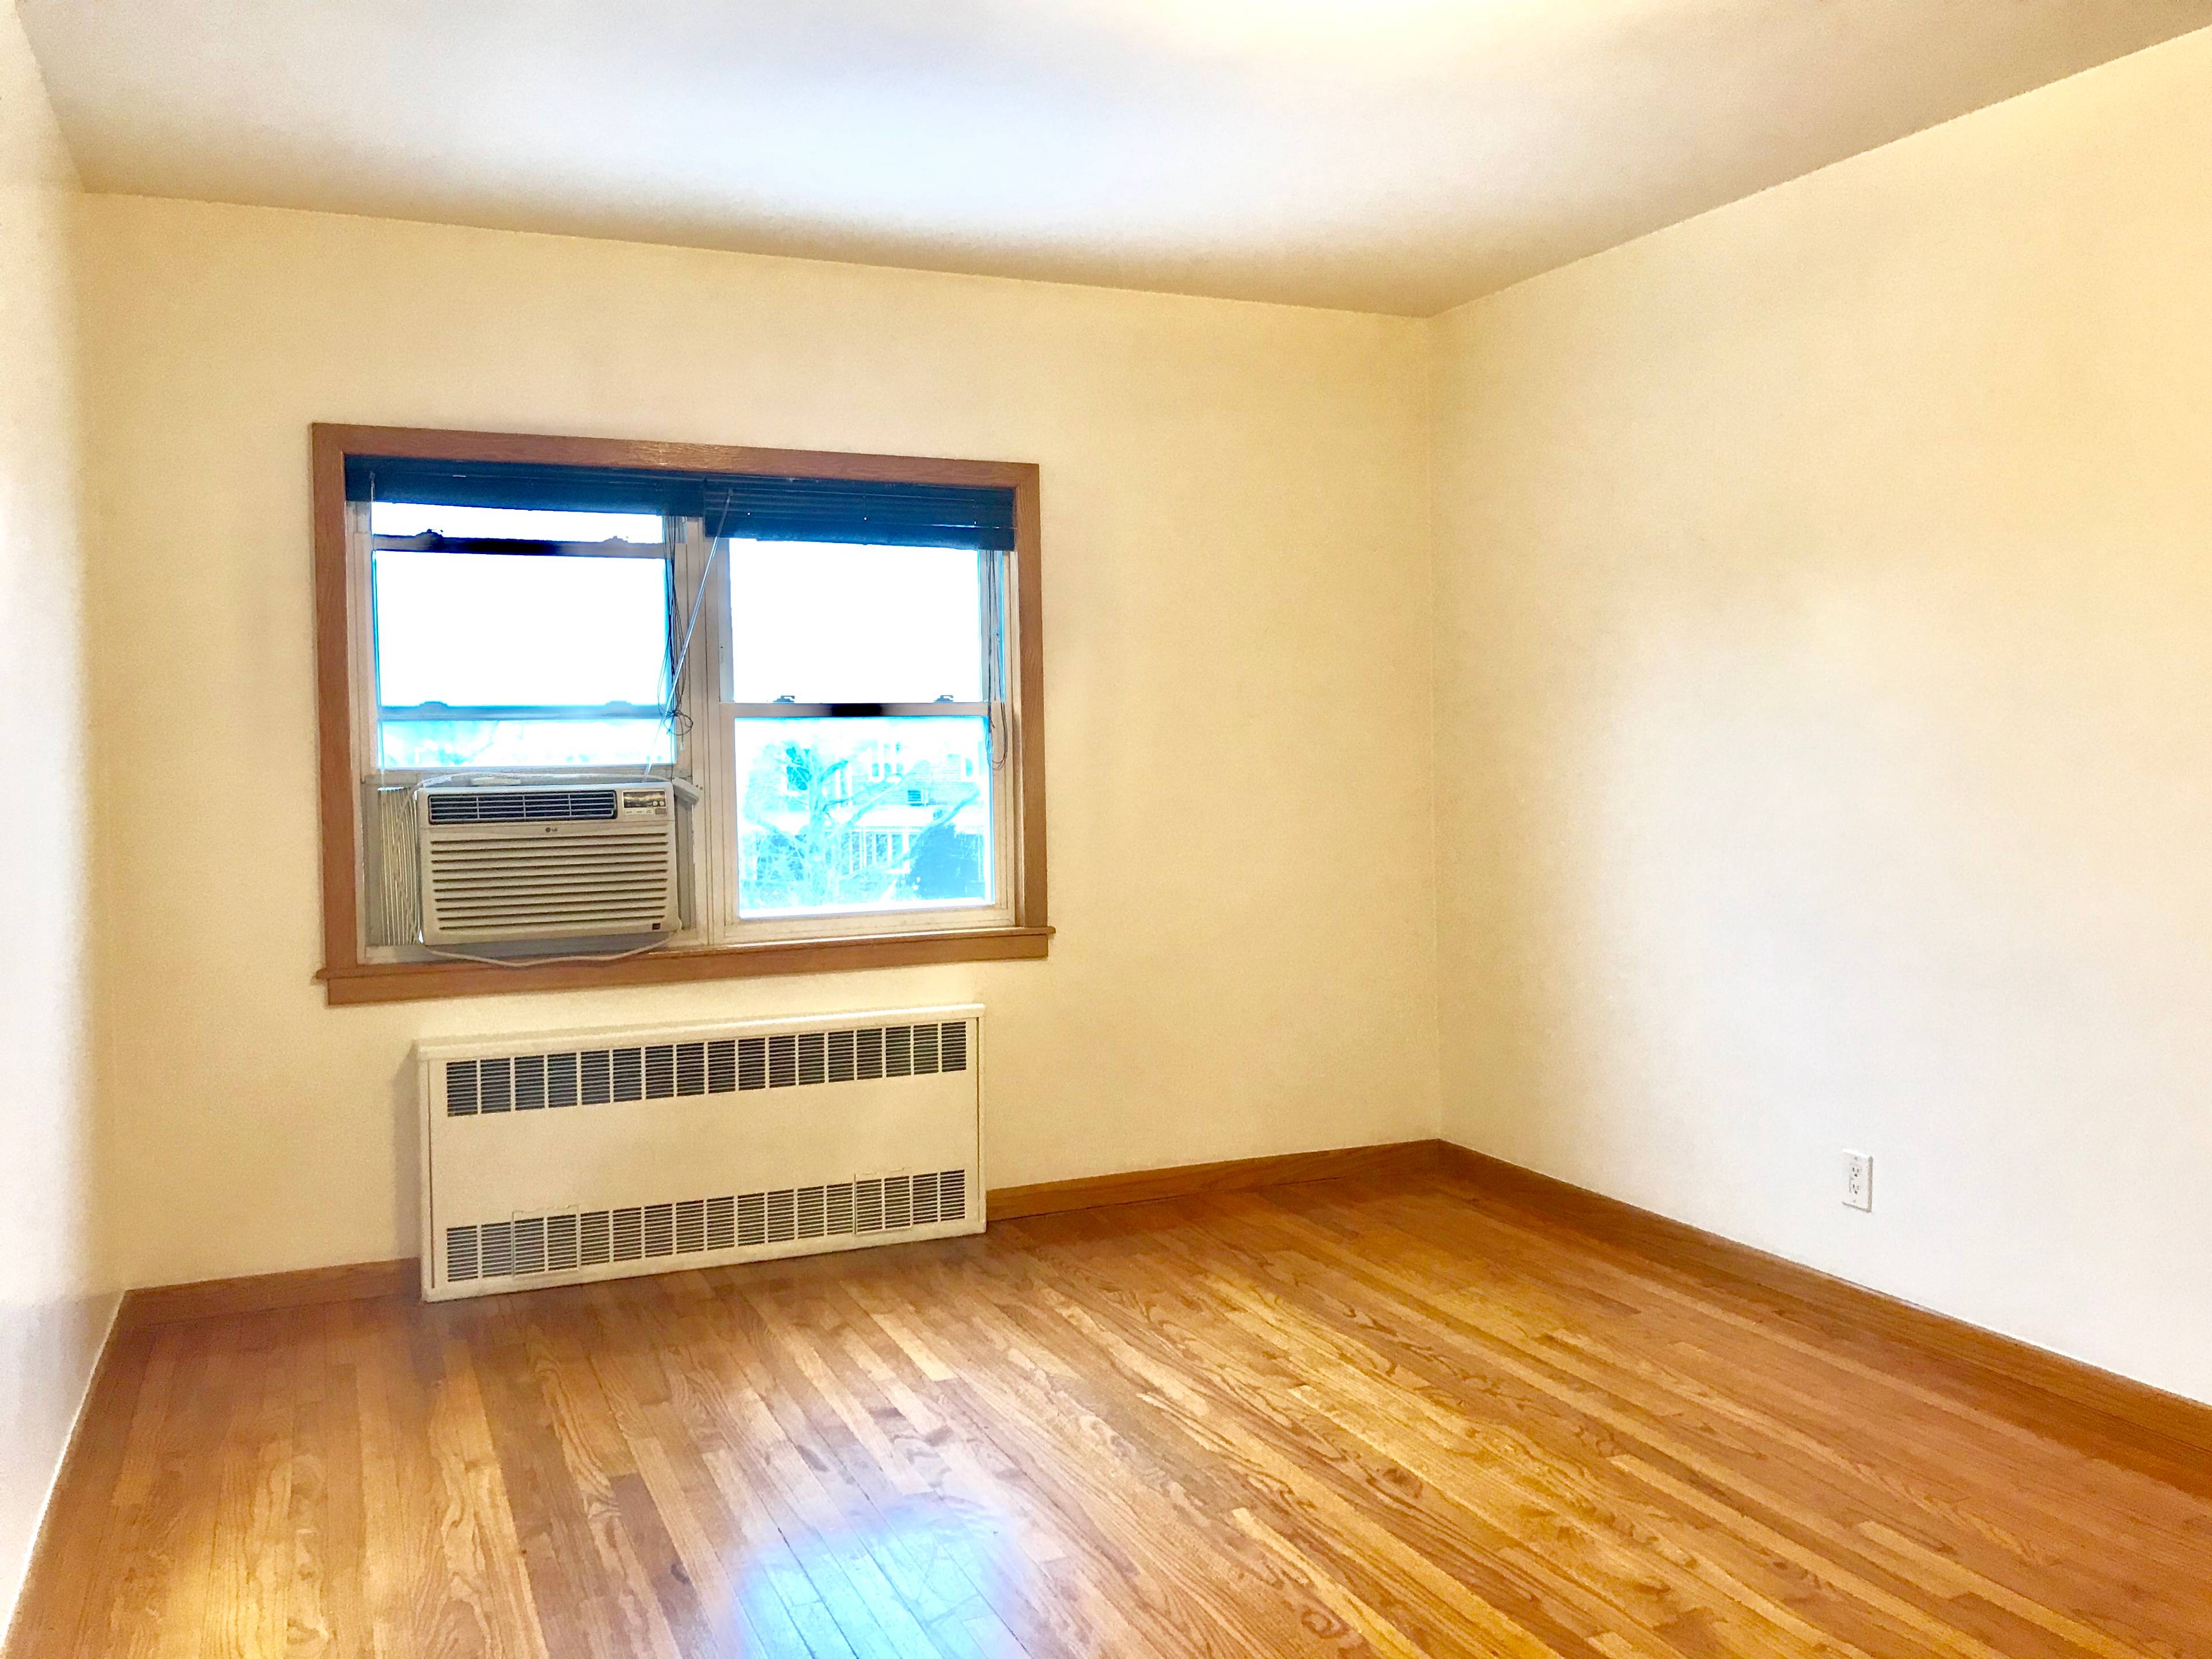 800 Square Foot One Bedroom Rental Apartment In Forest Hills / Rego Park Very Close To 67th Ave Train Stop